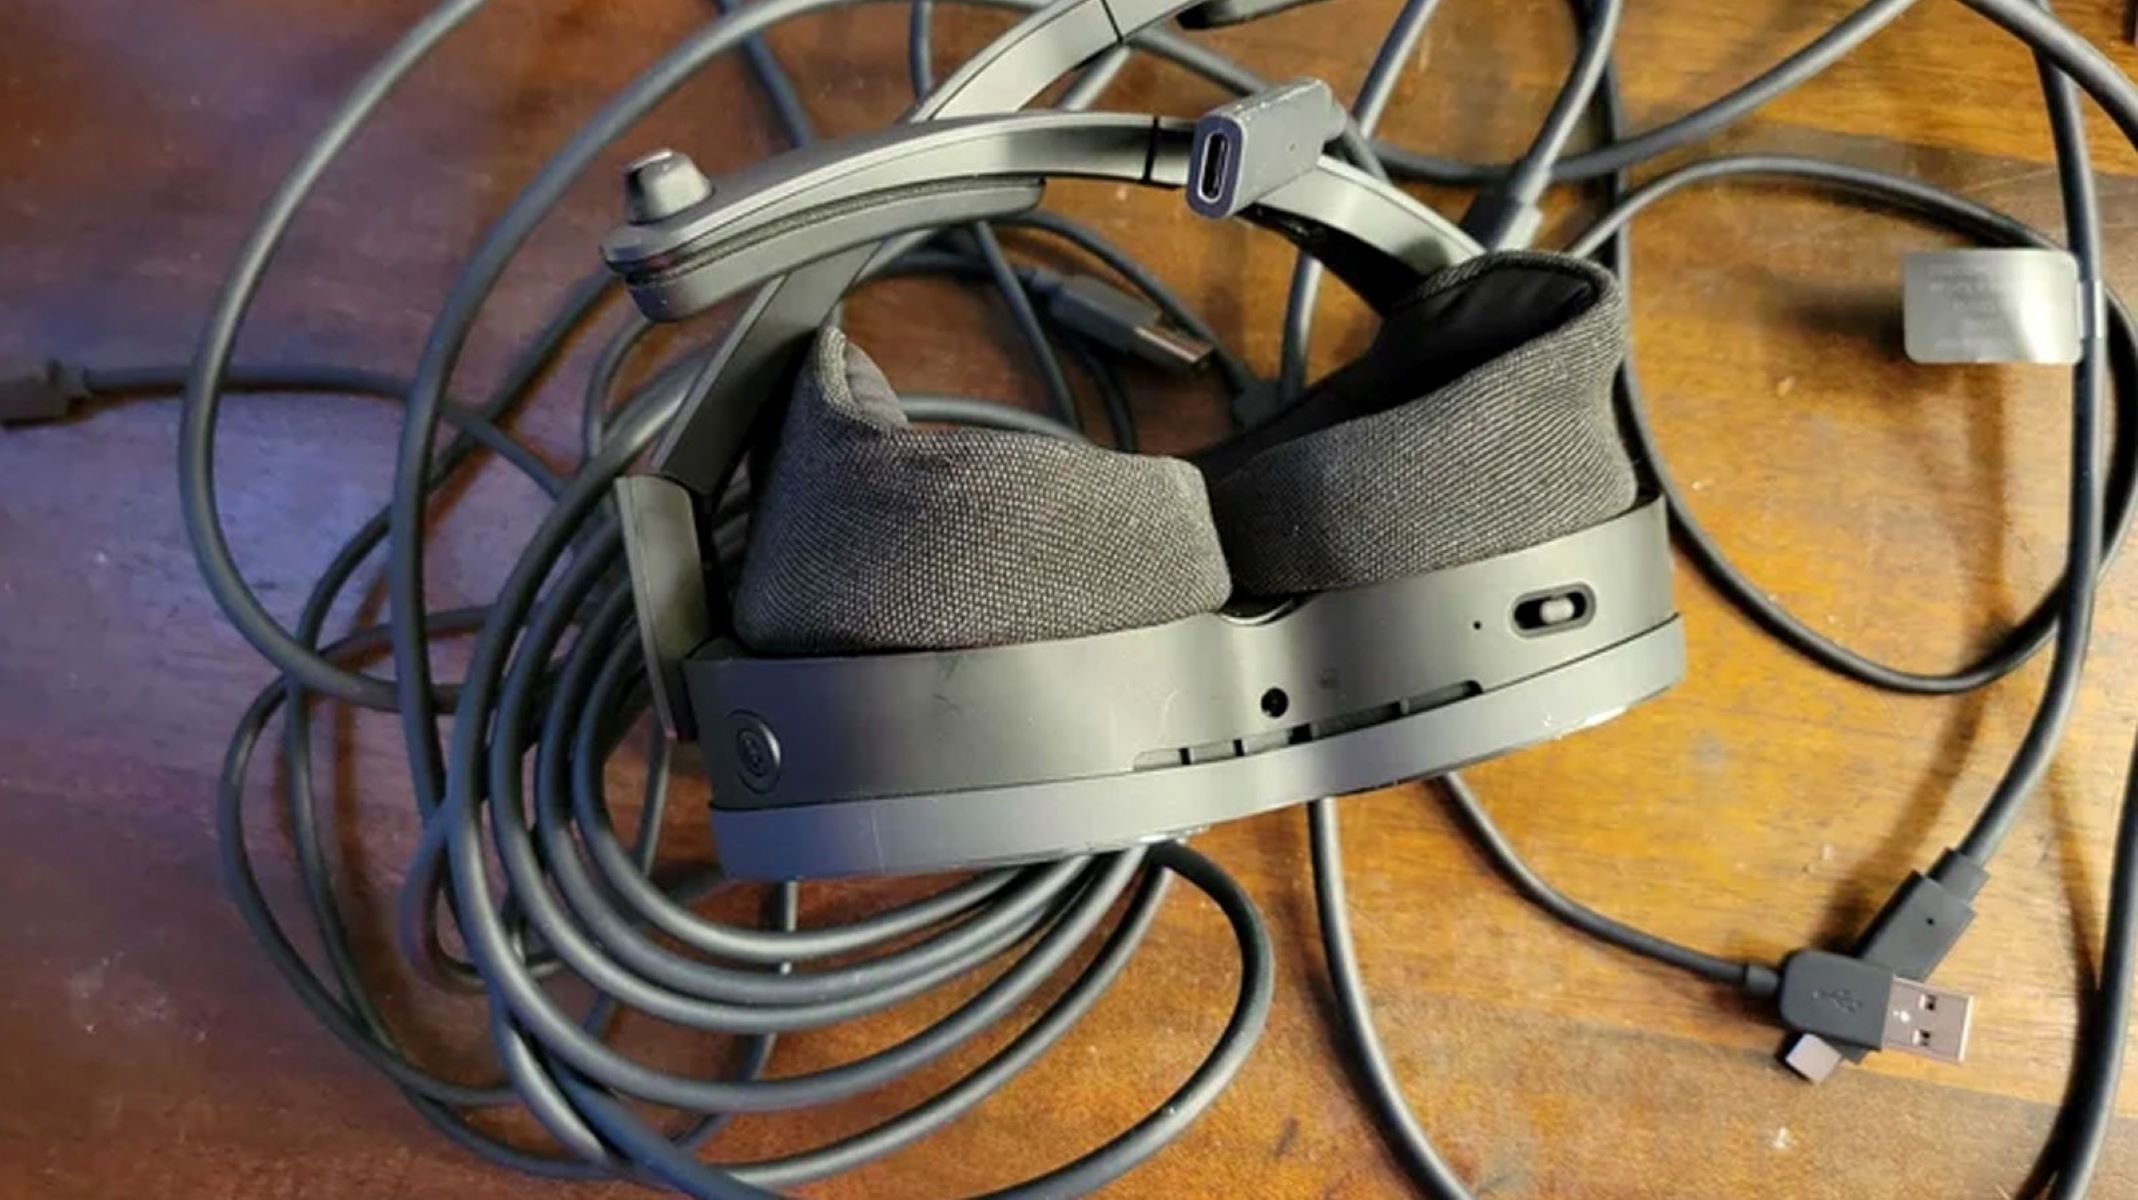 How To Not Trip Over HTC Vive Cord